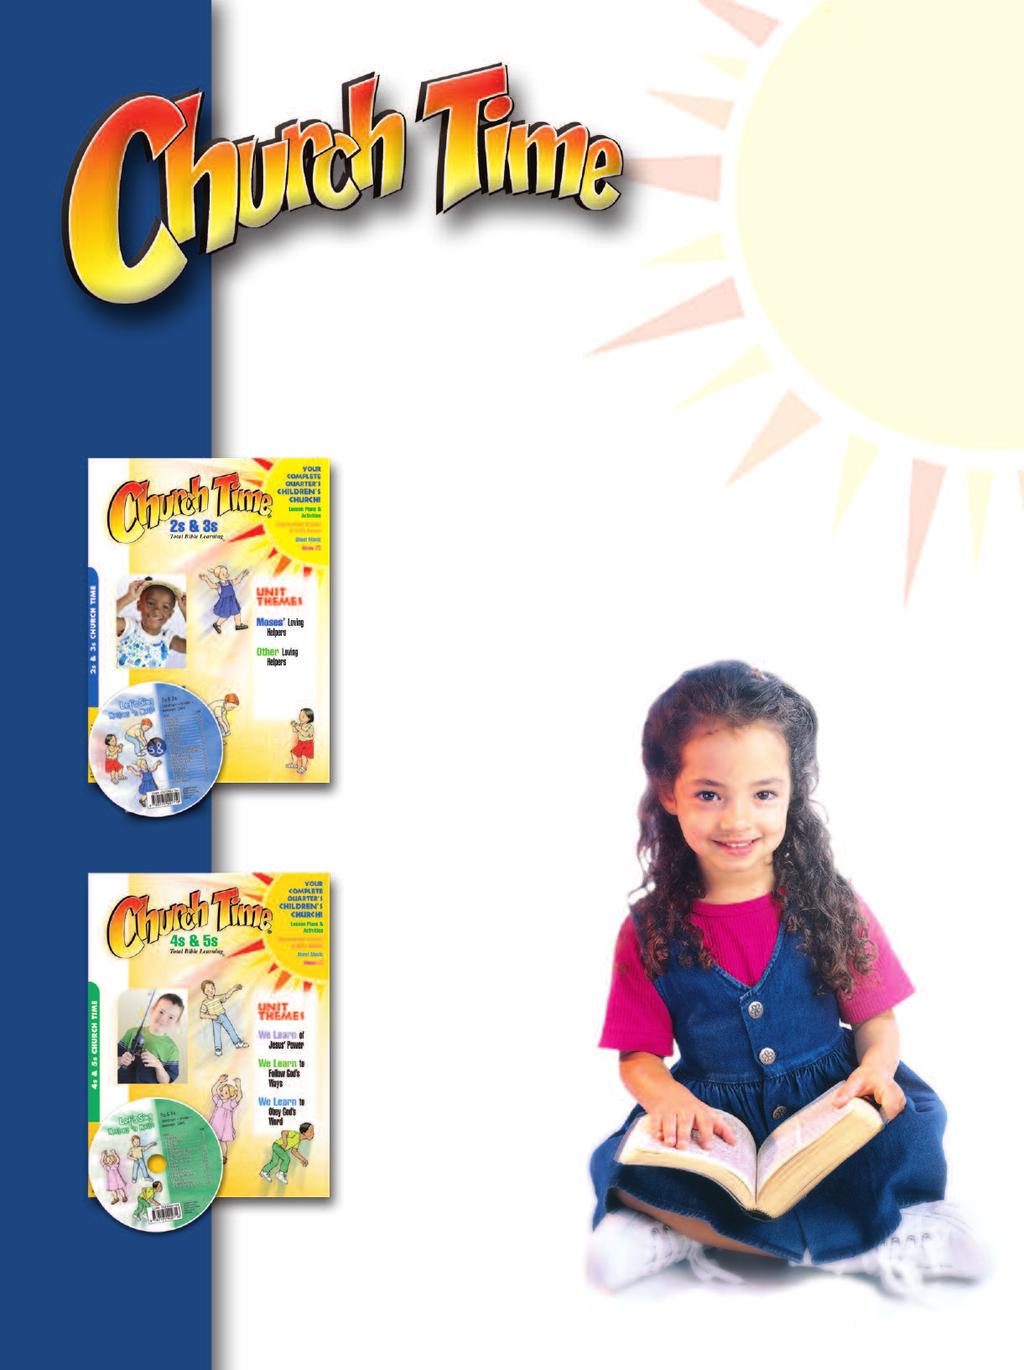 Lead your children into joyful praise and worship. With the Leader s Guide and Let s Sing Motions n Music CD, the Church Time packet contains all the curriculum you need for Total Bible Learning.